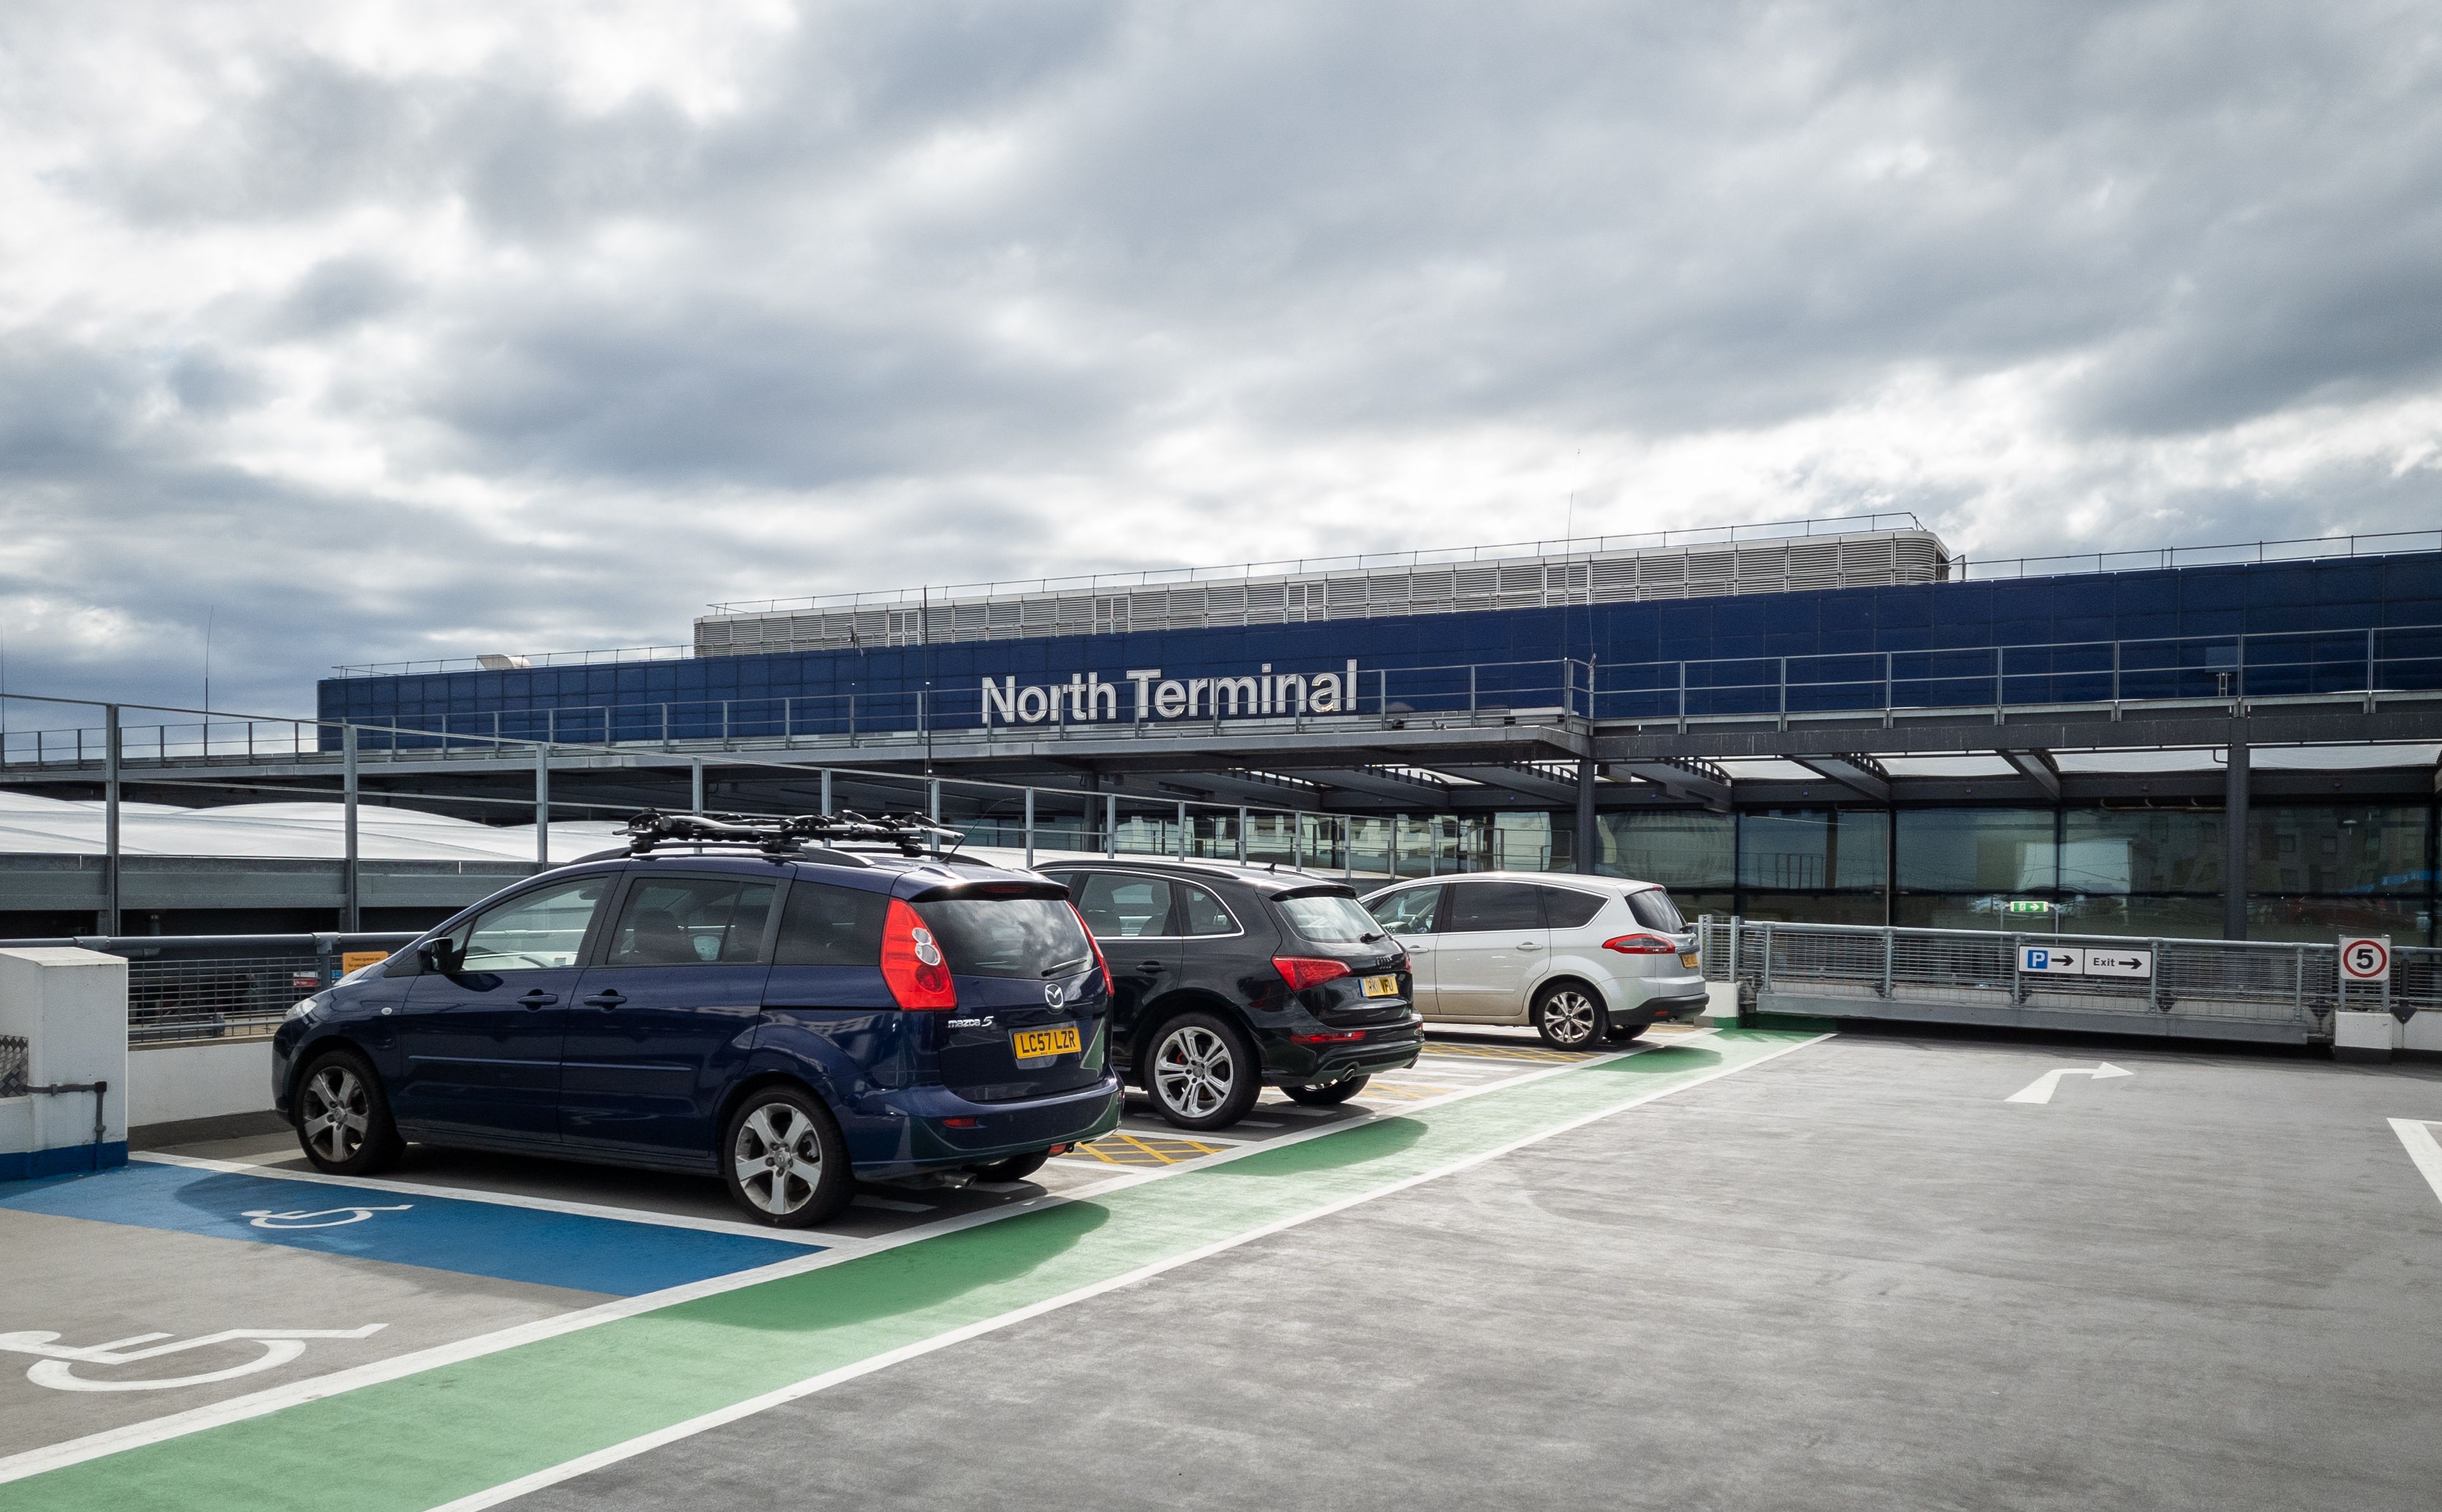 Cars parked near the North Terminal of London Gatwick airport.